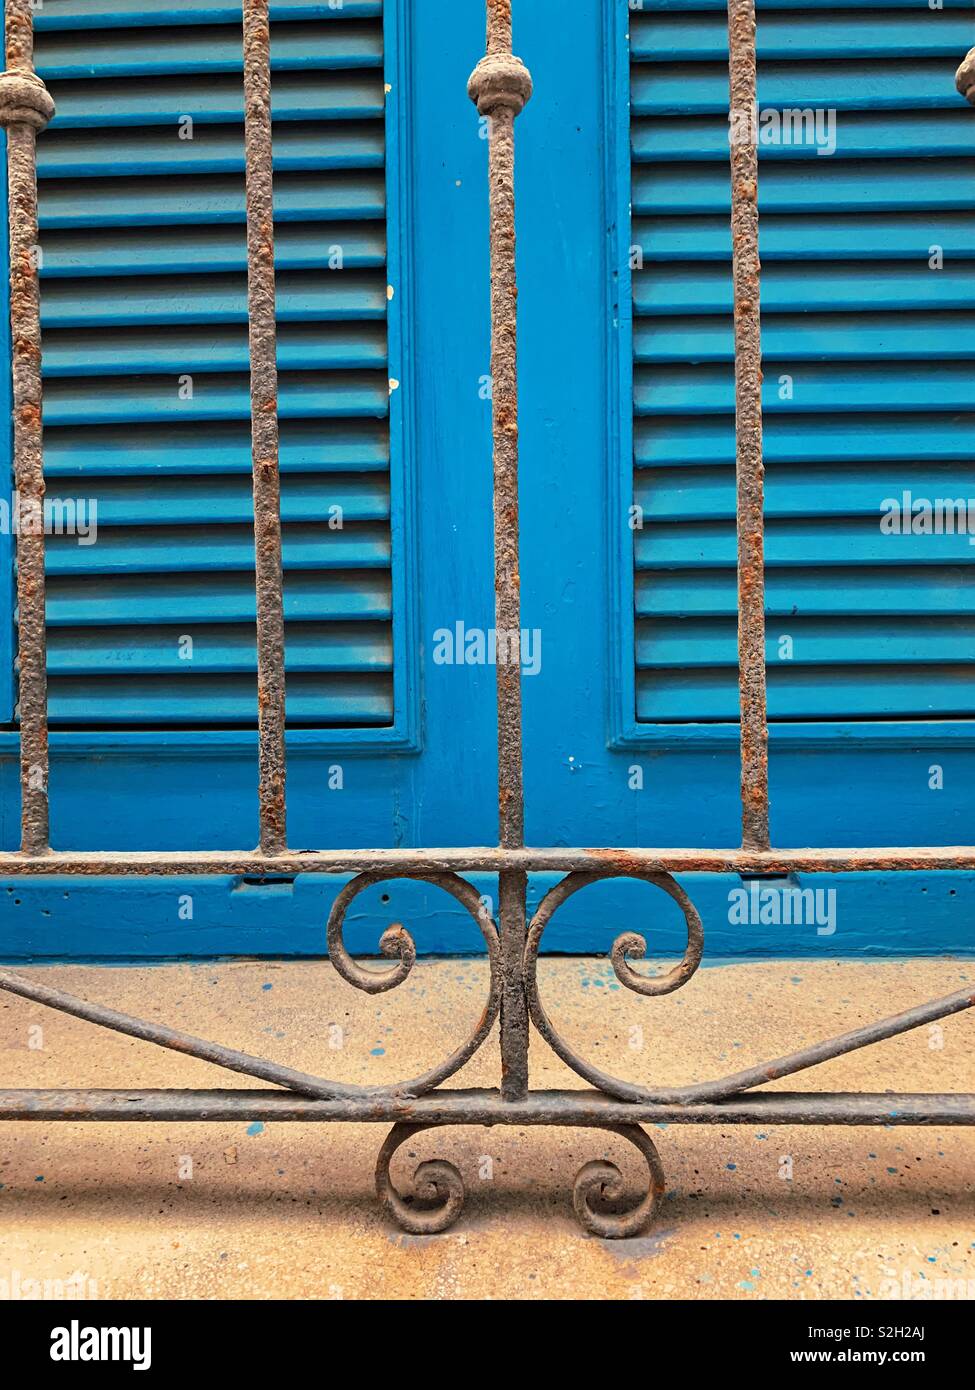 Decorative rusted window bars in front of blue exterior shutters in old Havana Cuba Stock Photo